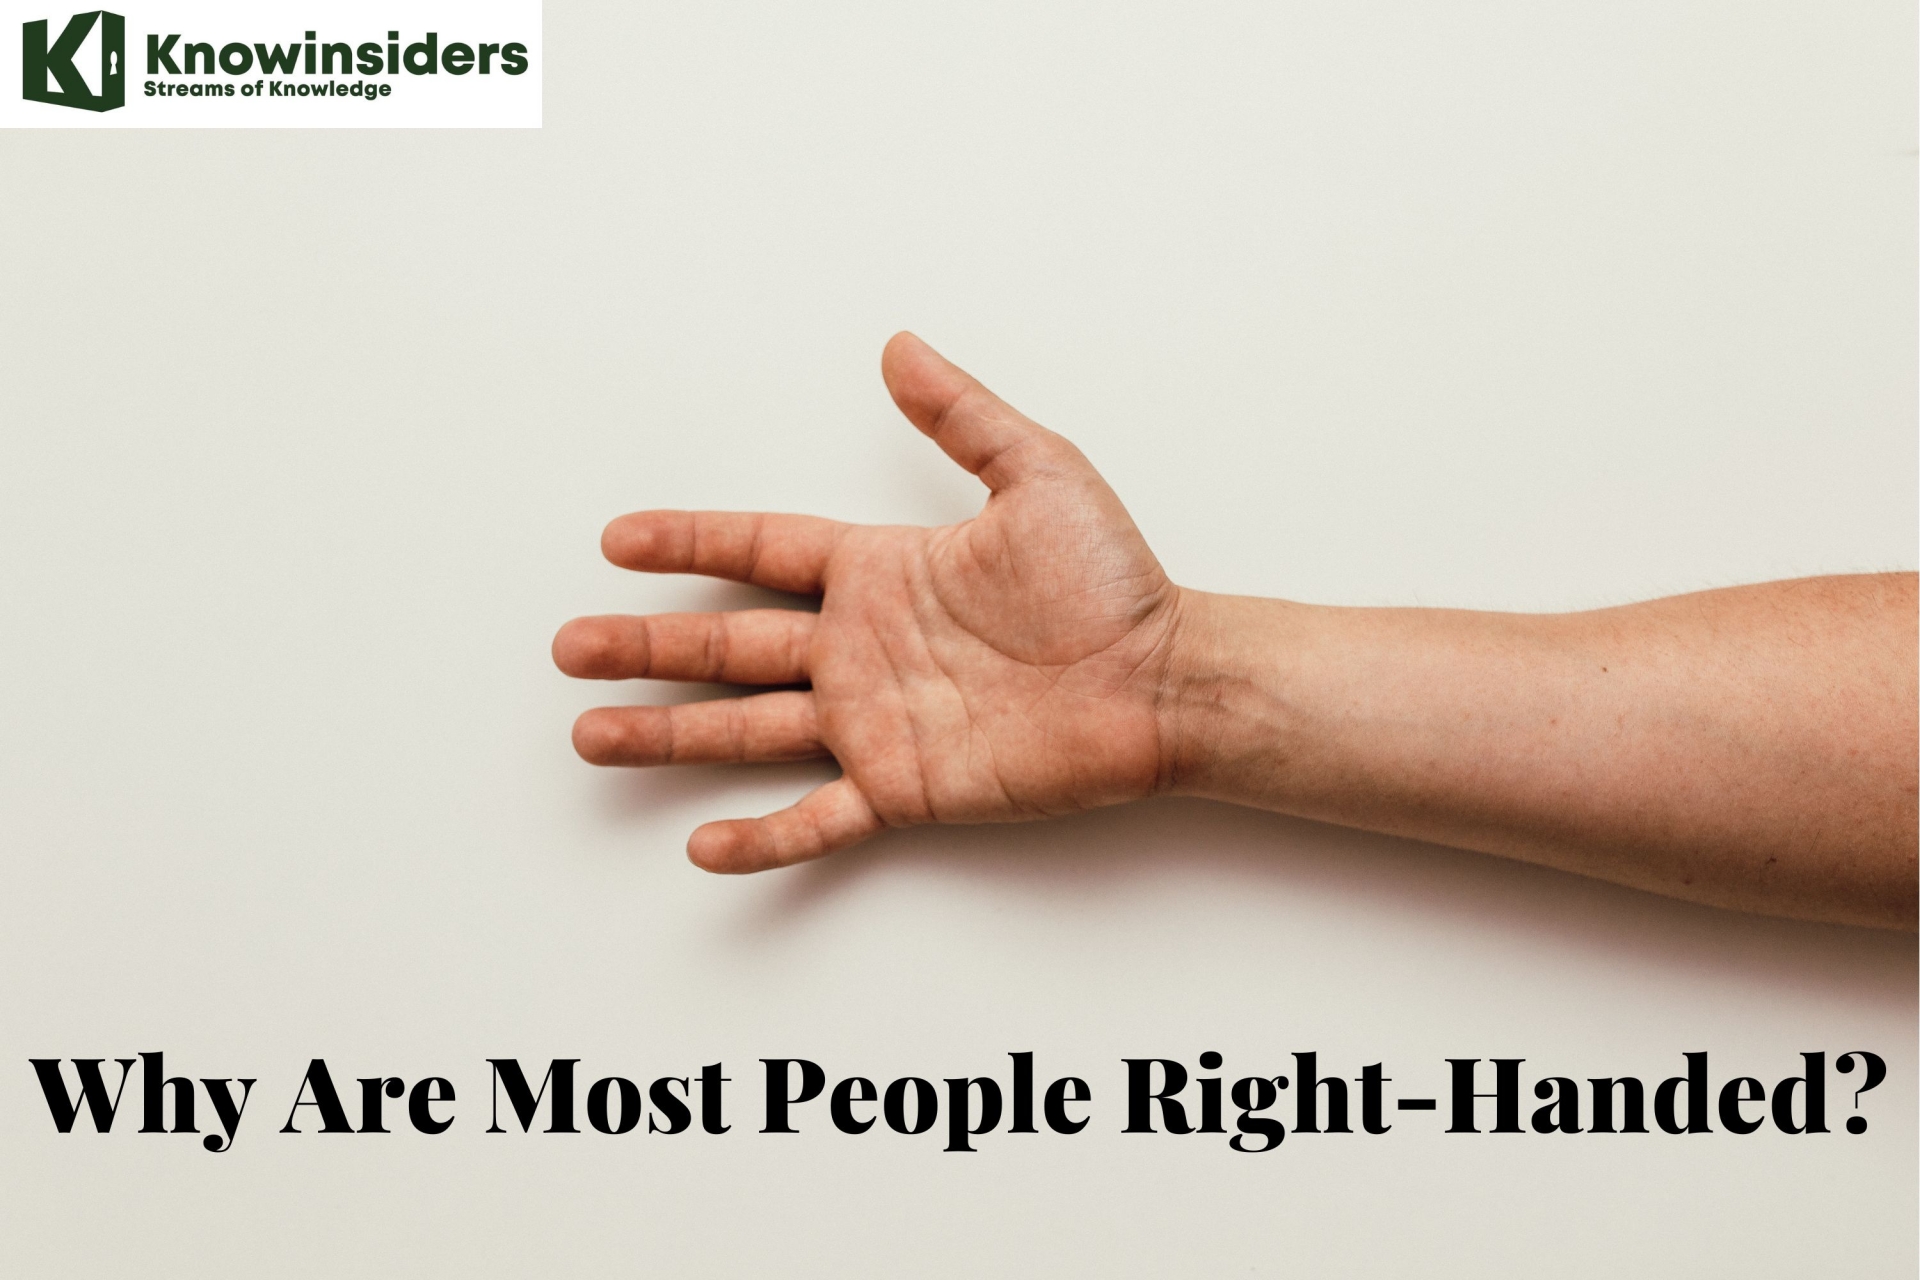 Why Are Most People Right-Handed?